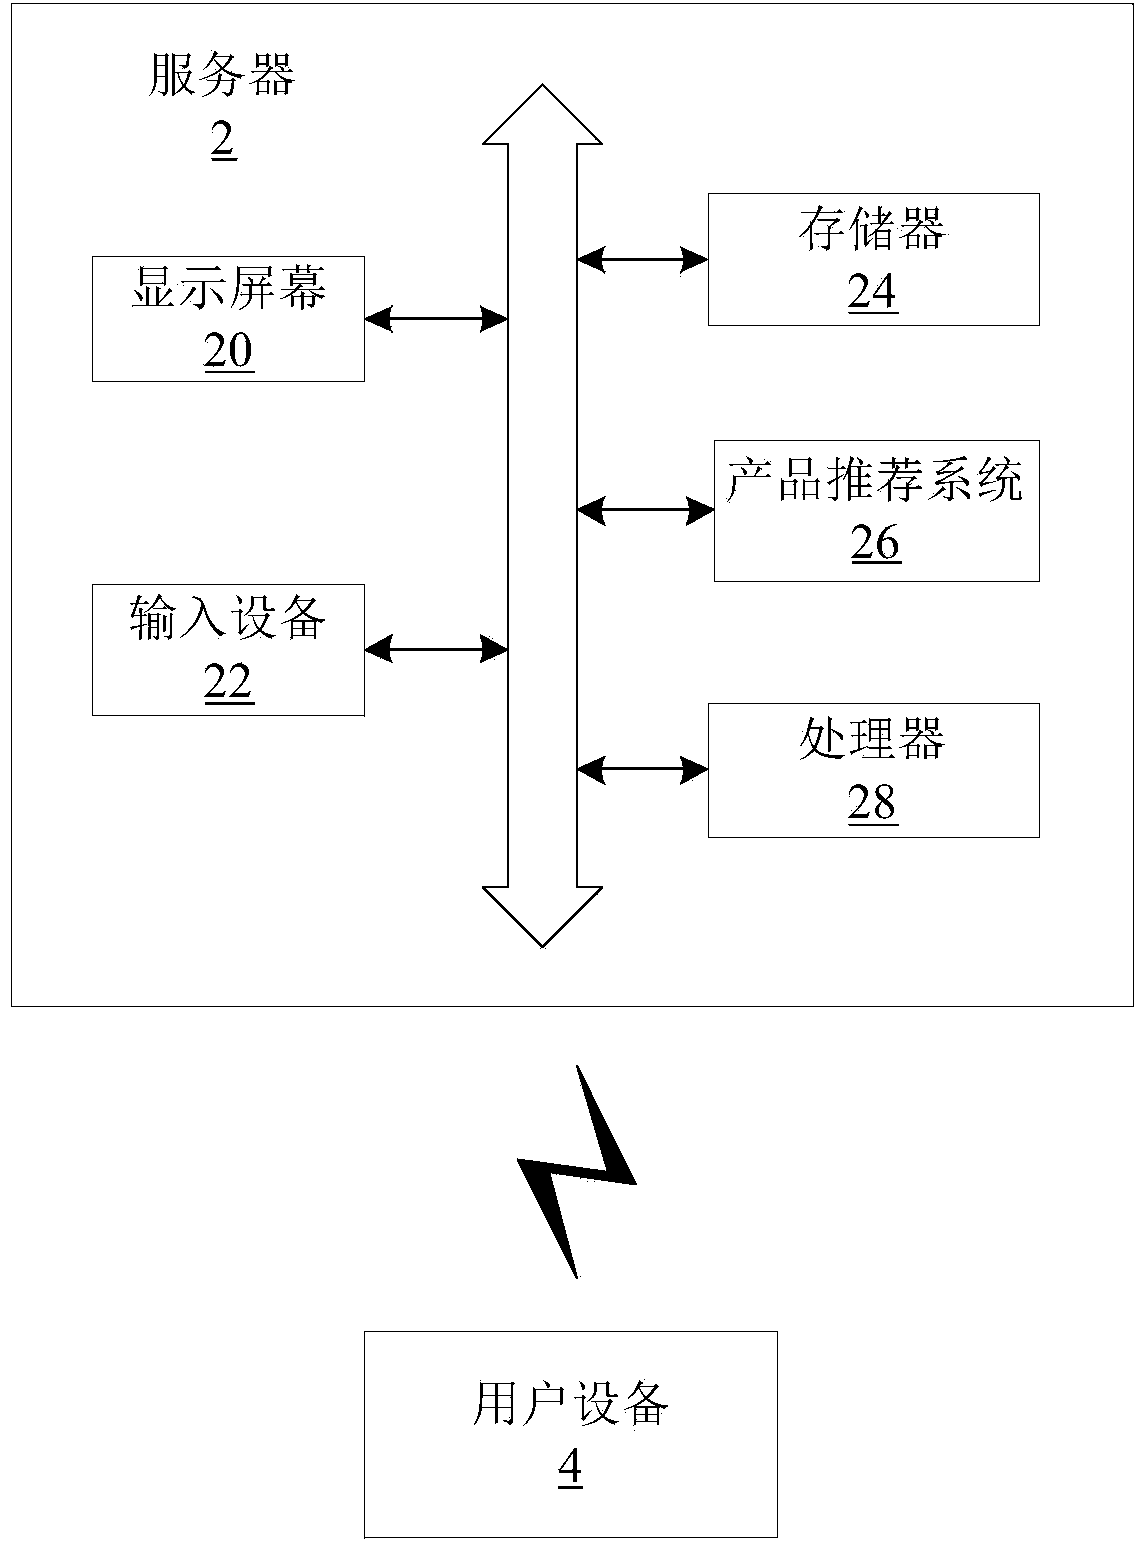 Product recommending system and method